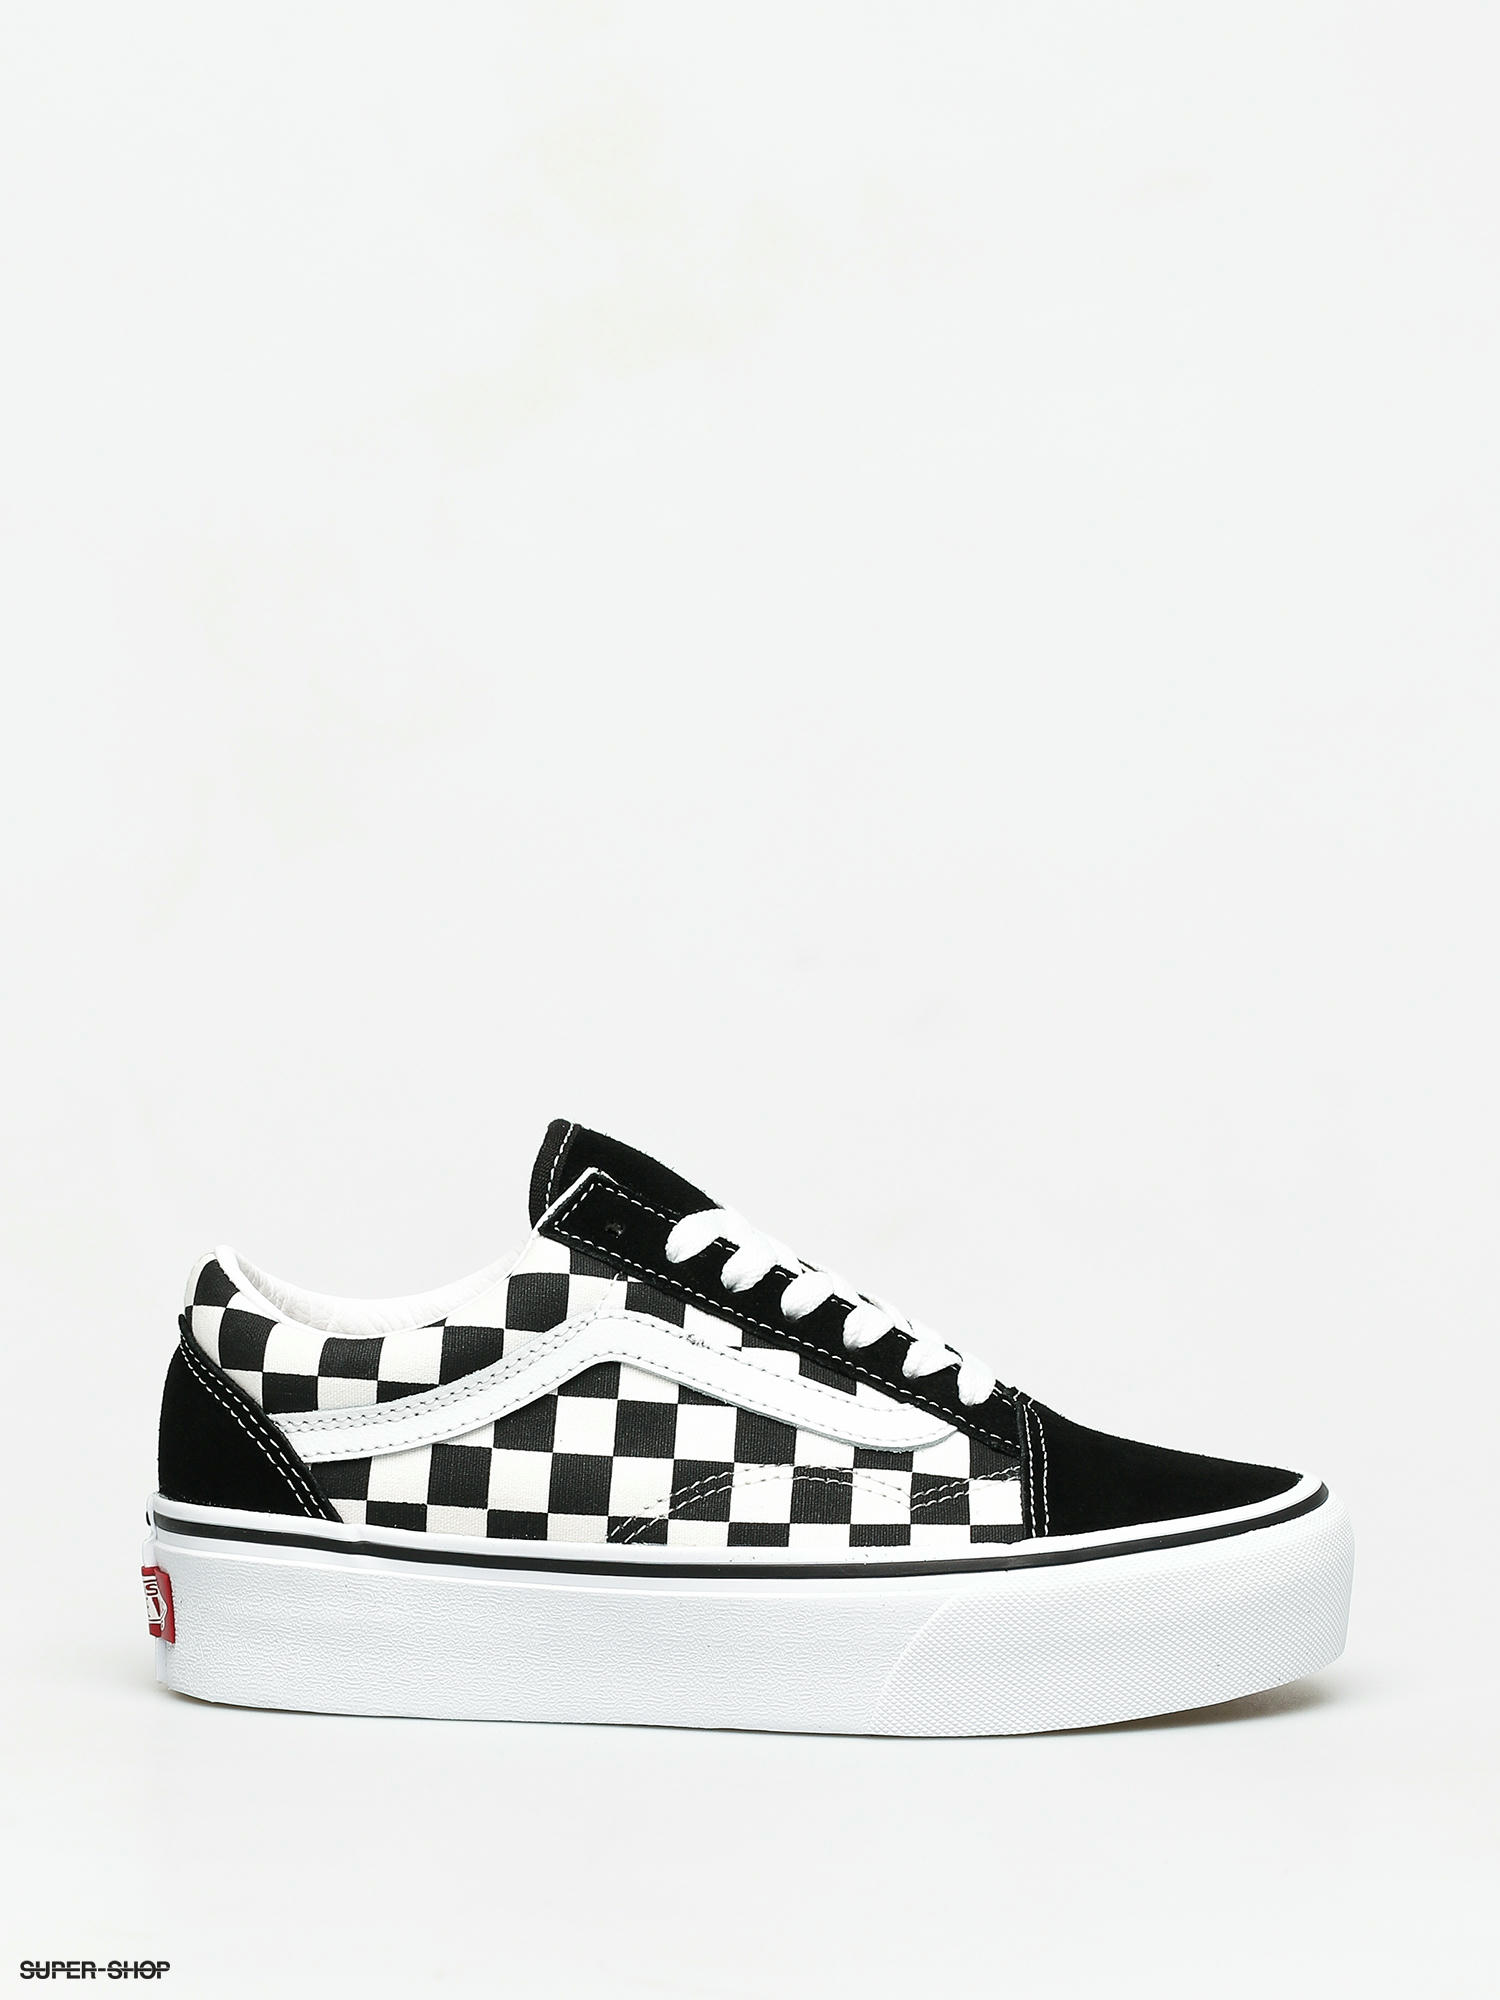 how to clean old skool checkered vans